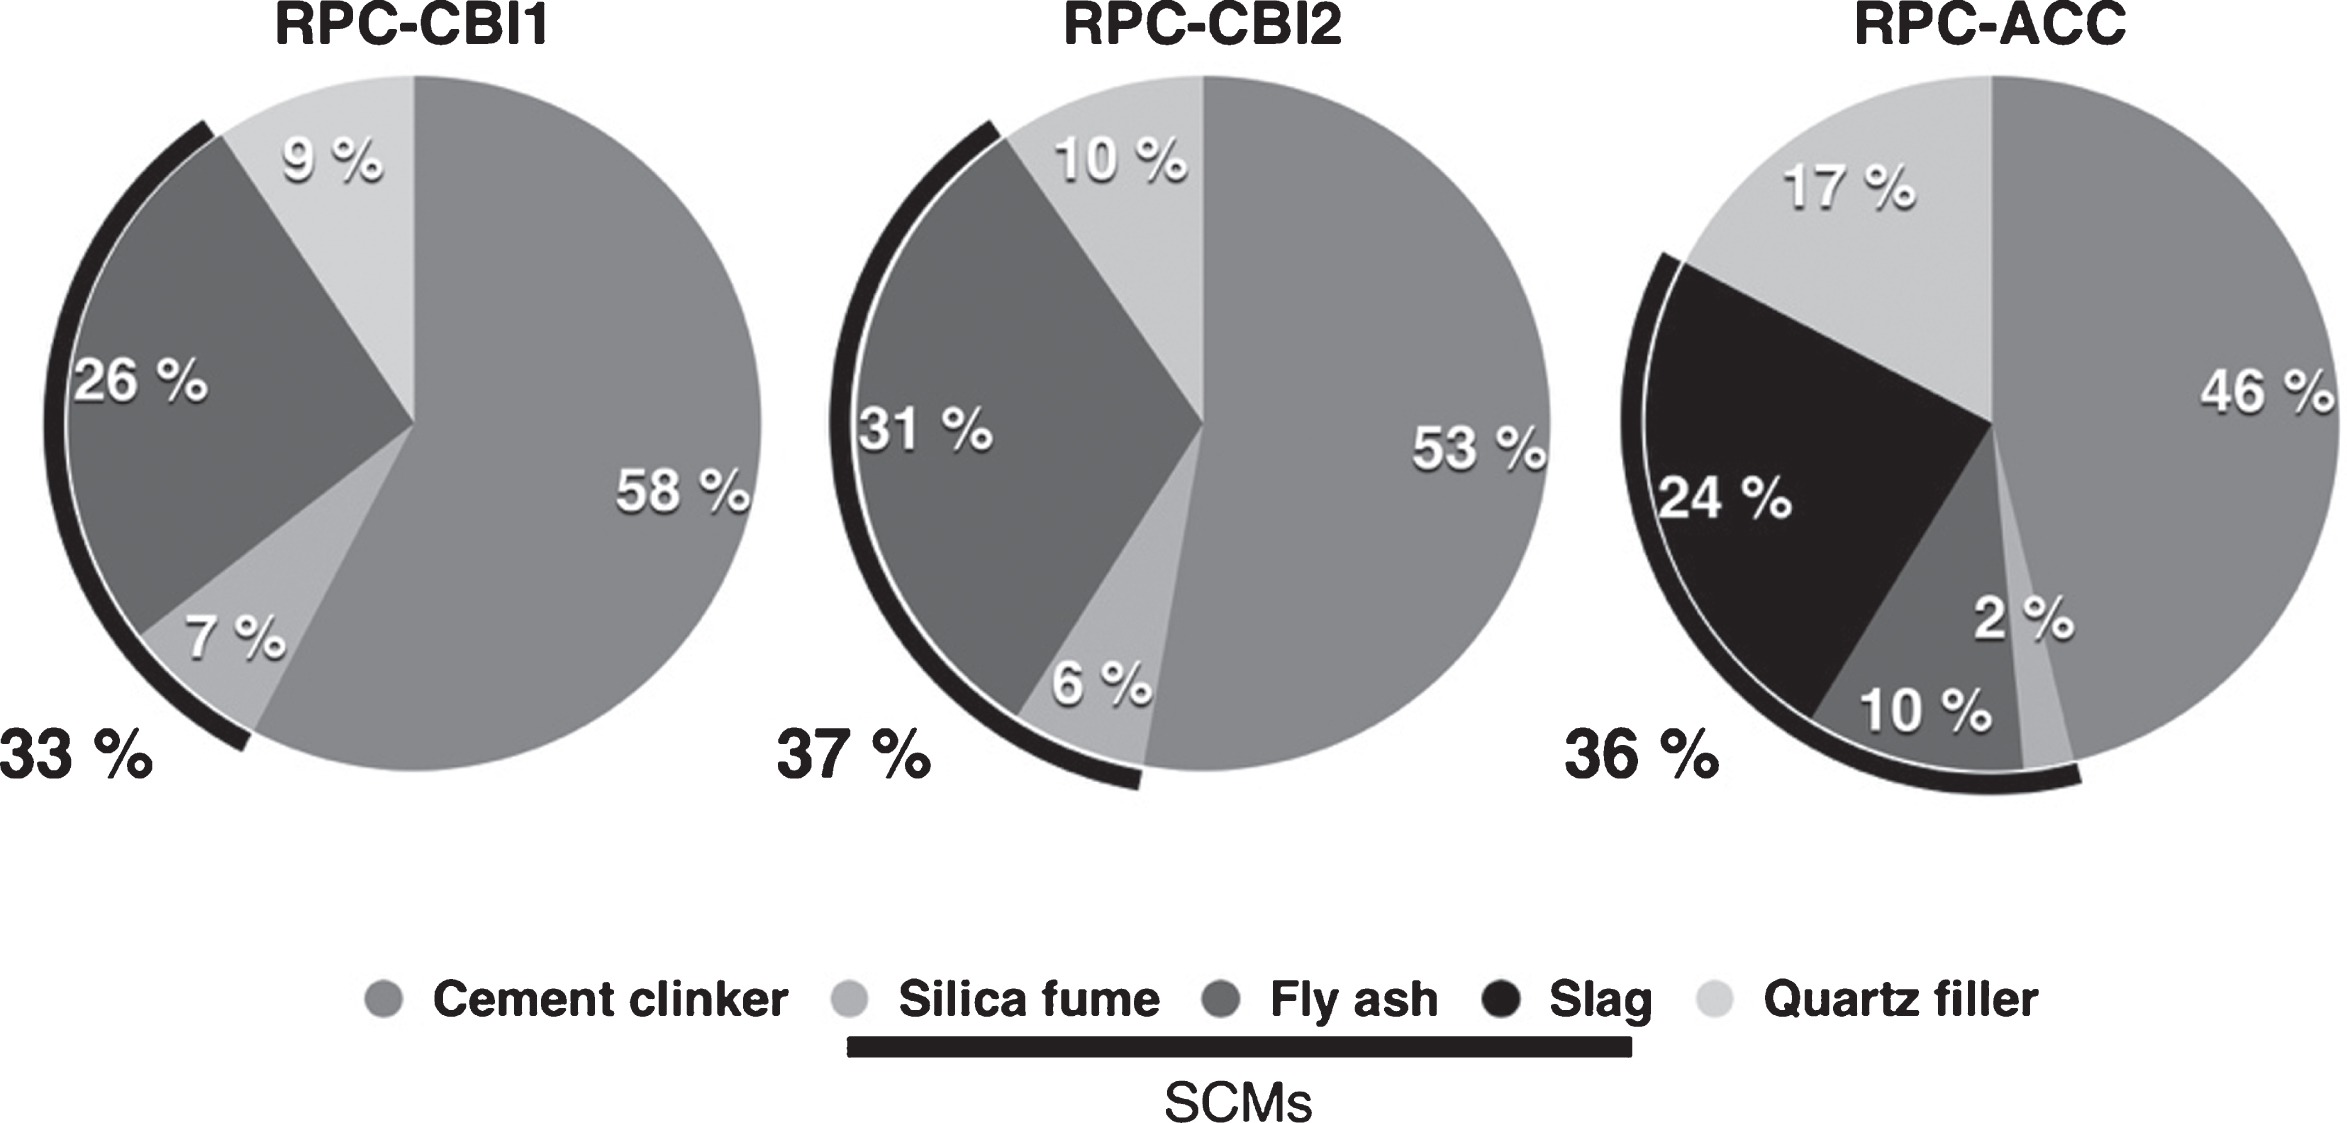 Clinker replacement levels by supplementary cementitious materials (SCMs) for the RPC mix approaches of CBI and ACCIONA (on the total solid powder content, without aggregate).